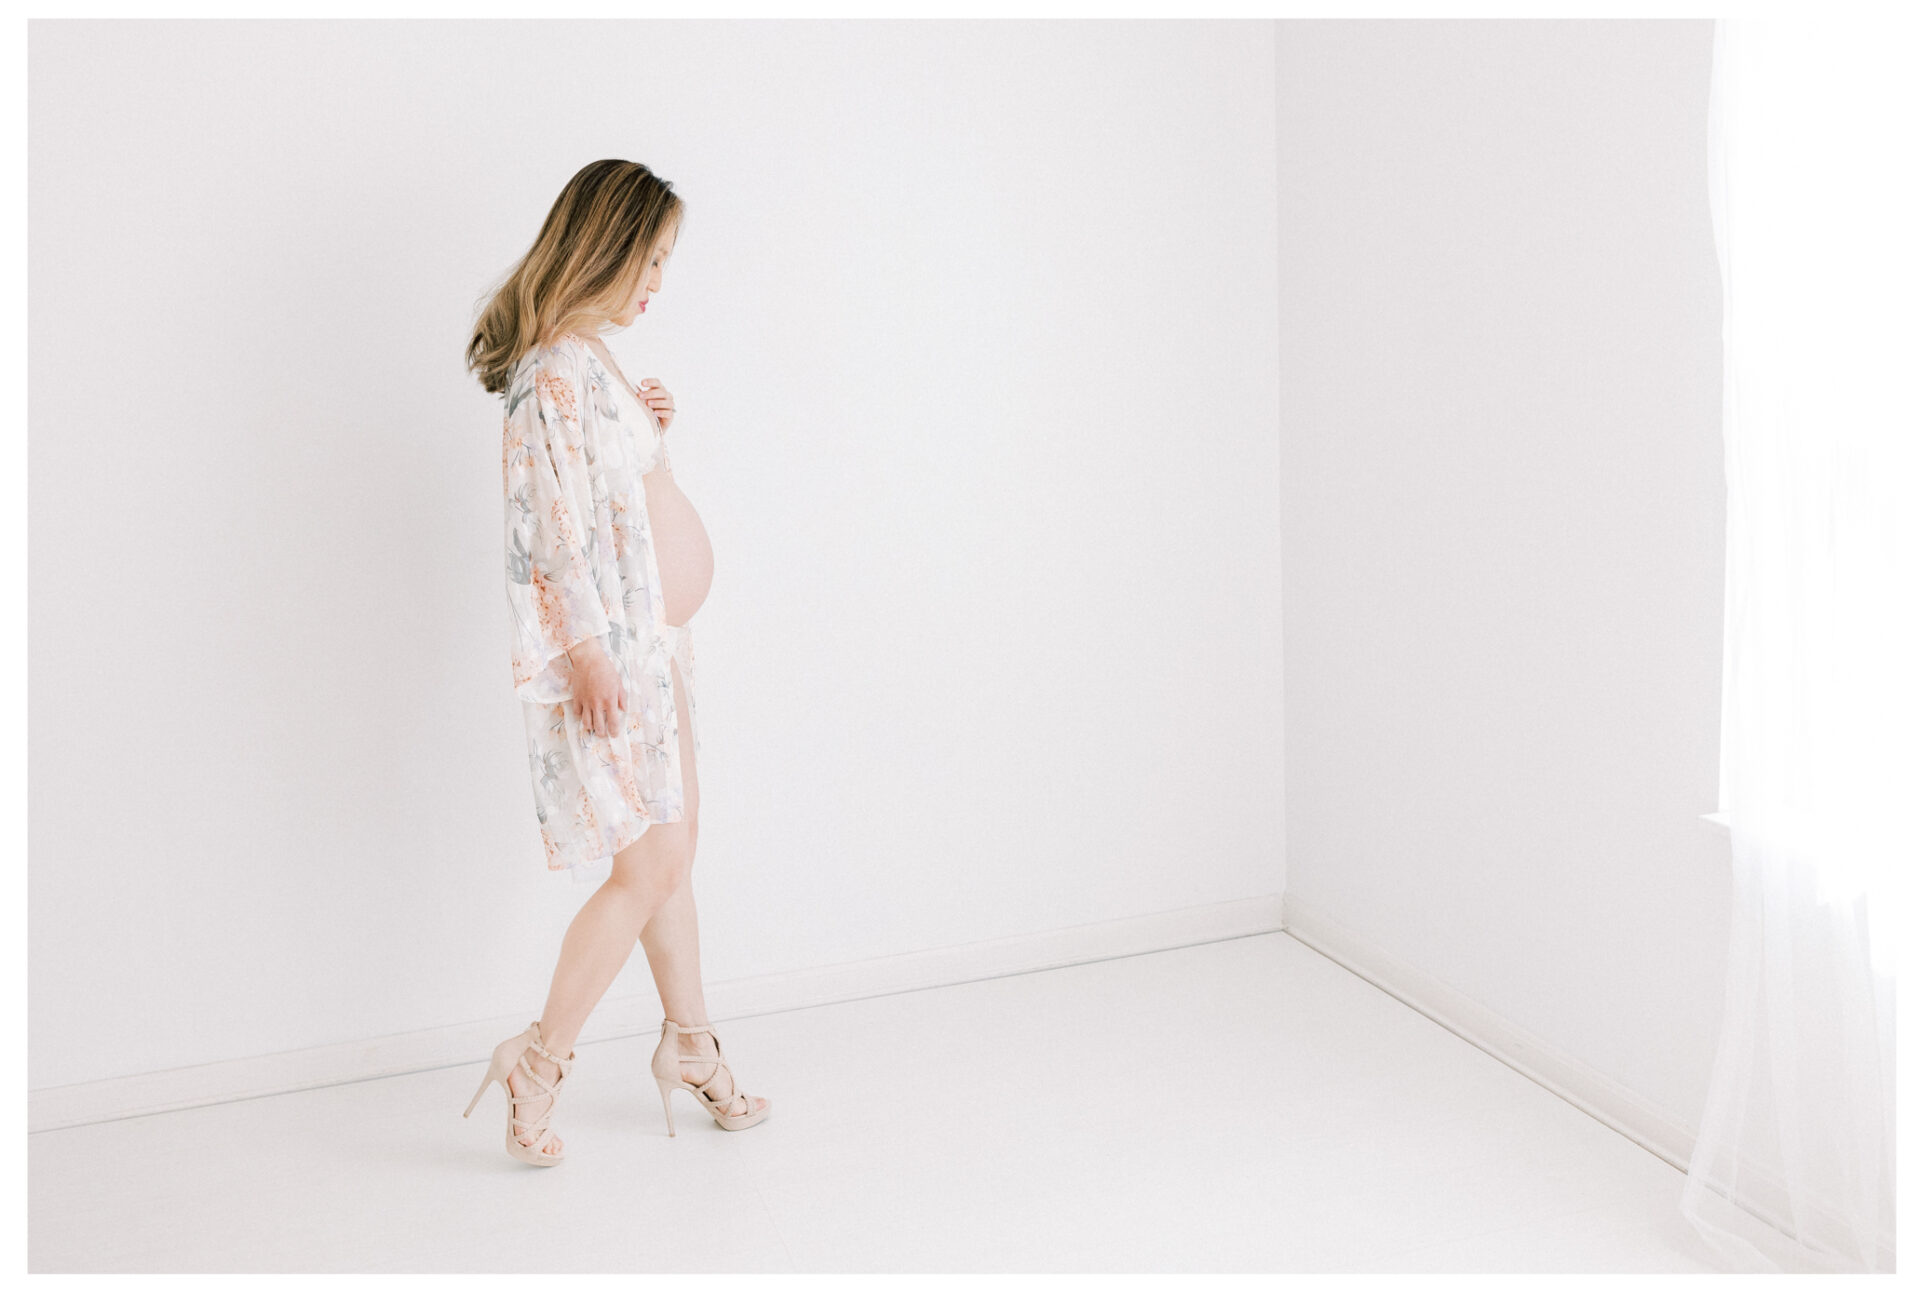 Winter Freire Photography | Fine Art Maternity Boudoir | Expecting mother walking in high heels while wearing a floral robe